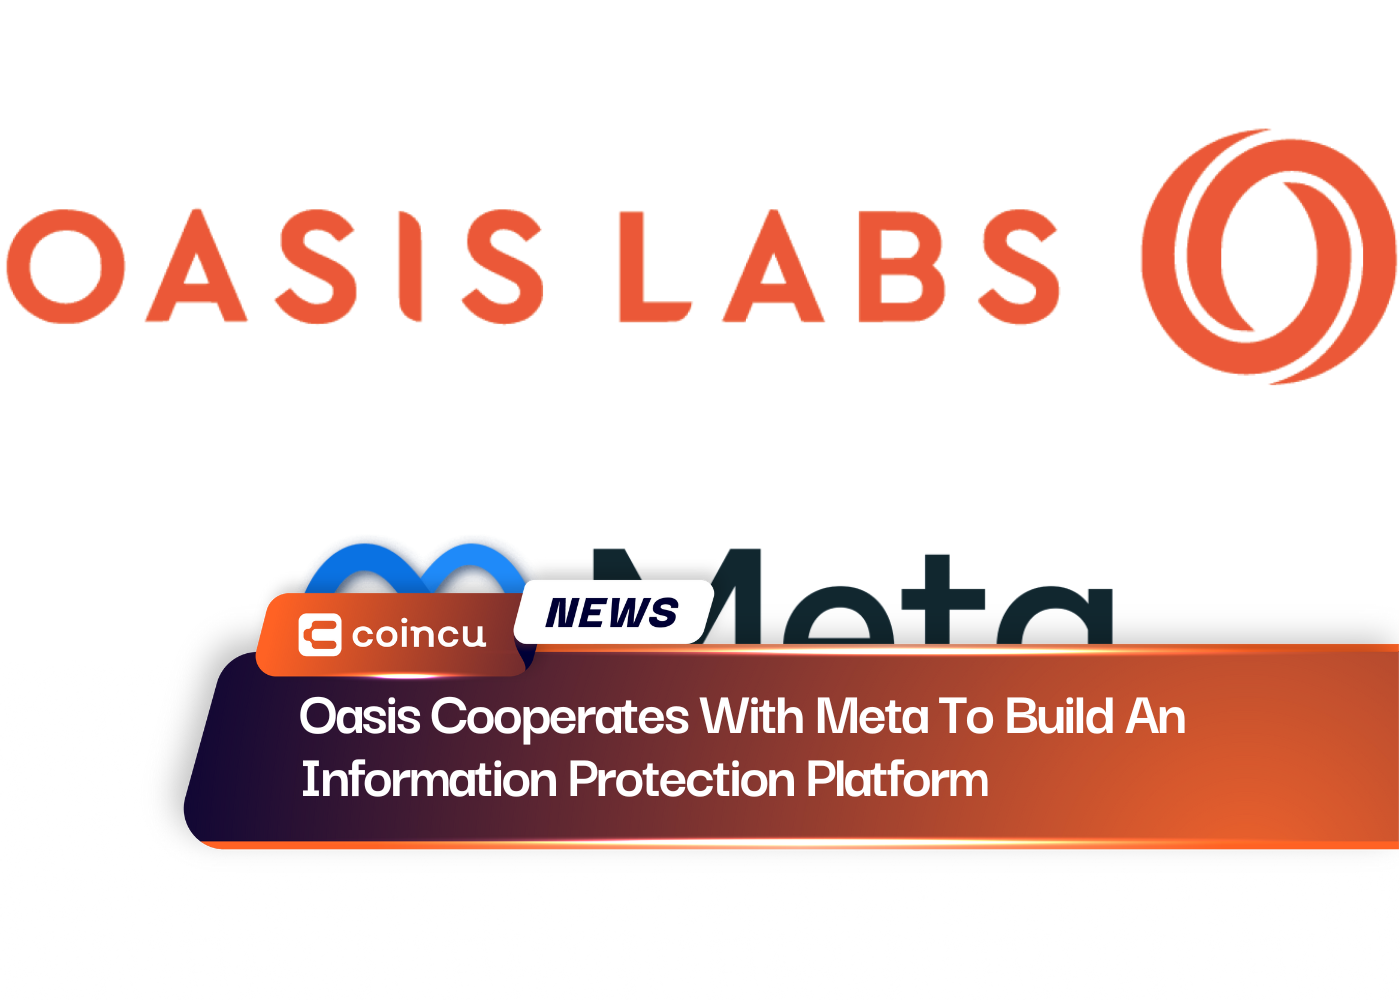 Oasis Cooperates With Meta To Build An Information Protection Platform